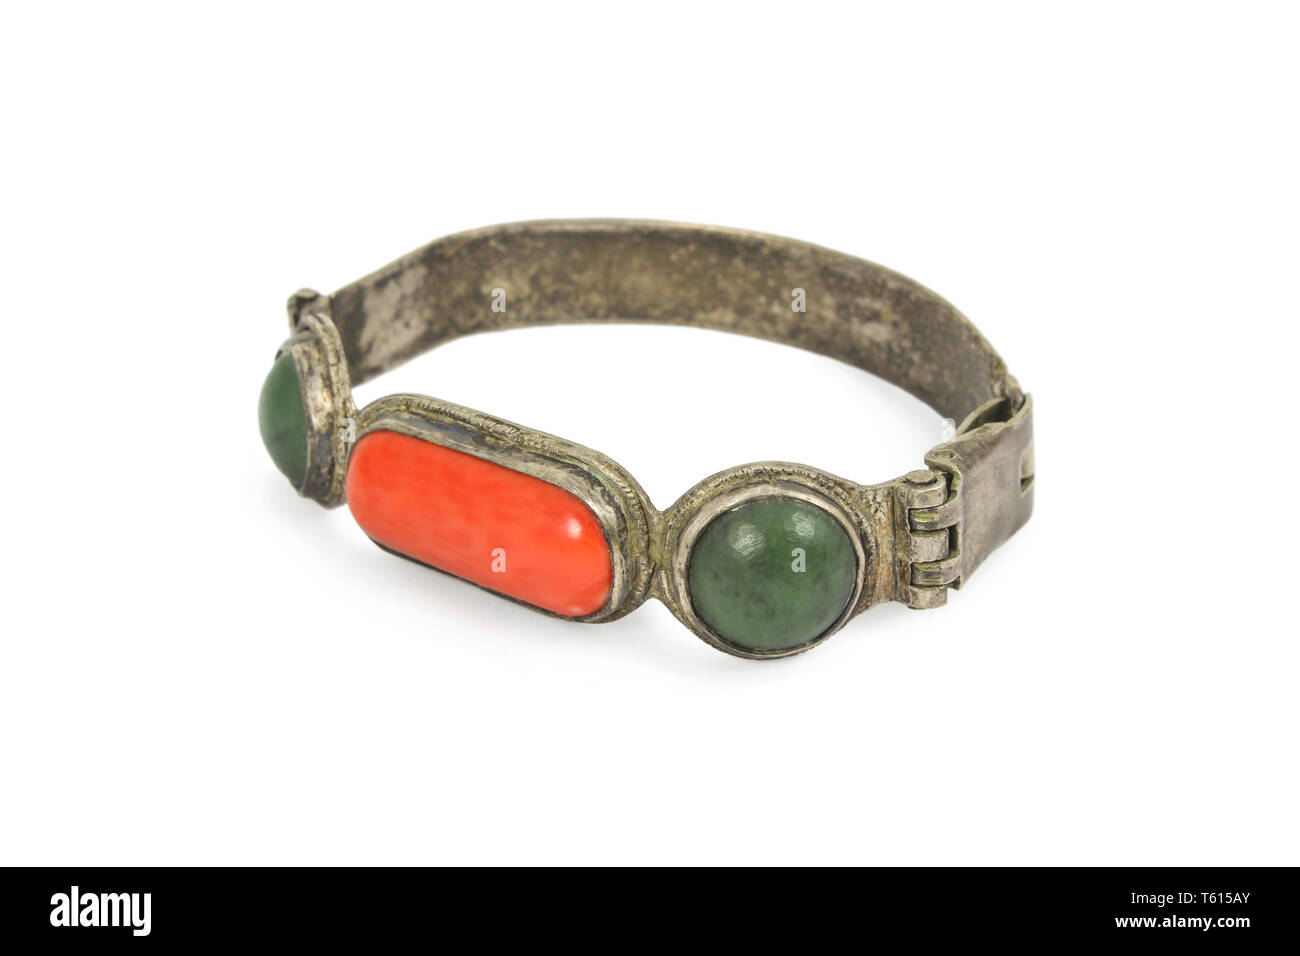 Ancient buddhist bracelet in silver and semiprecious stones Stock Photo